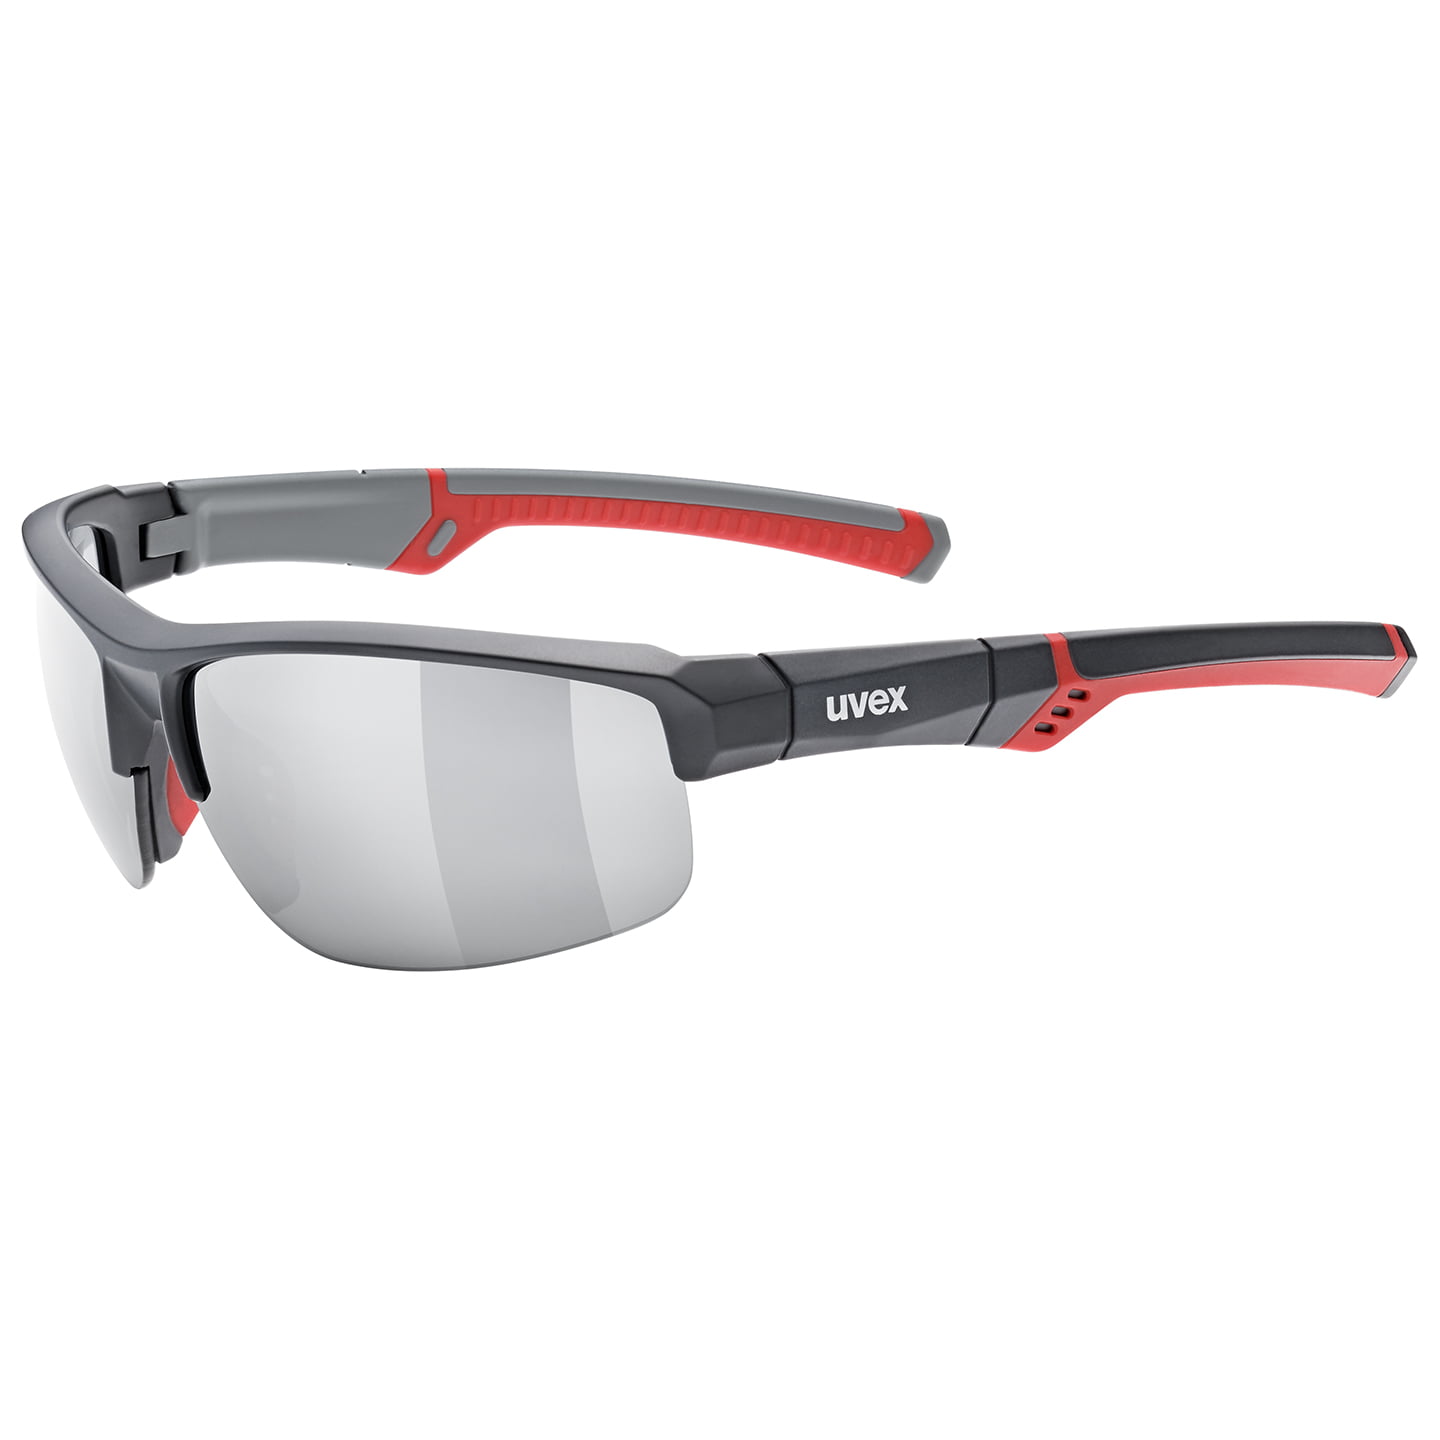 UVEX Sportstyle 226 2024 Cycling Eyewear Cycling Glasses, Unisex (women / men), Cycle glasses, Bike accessories